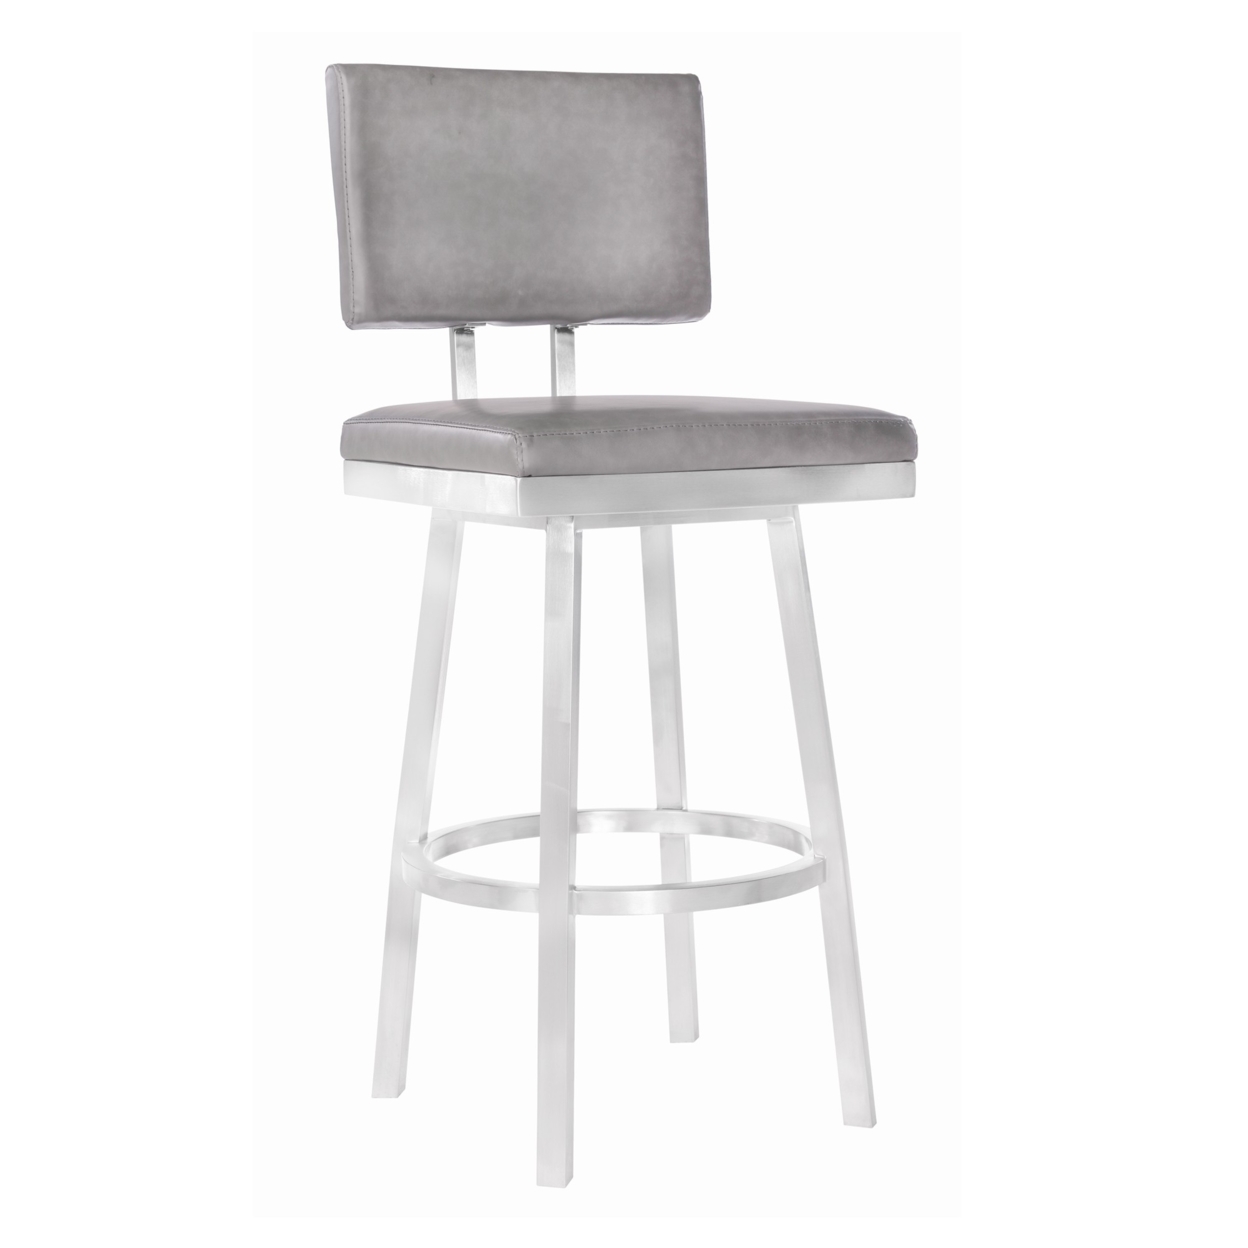 Lumbar Back Faux Leather Barstool With Stainless Steel Legs, Gray And Silver- Saltoro Sherpi